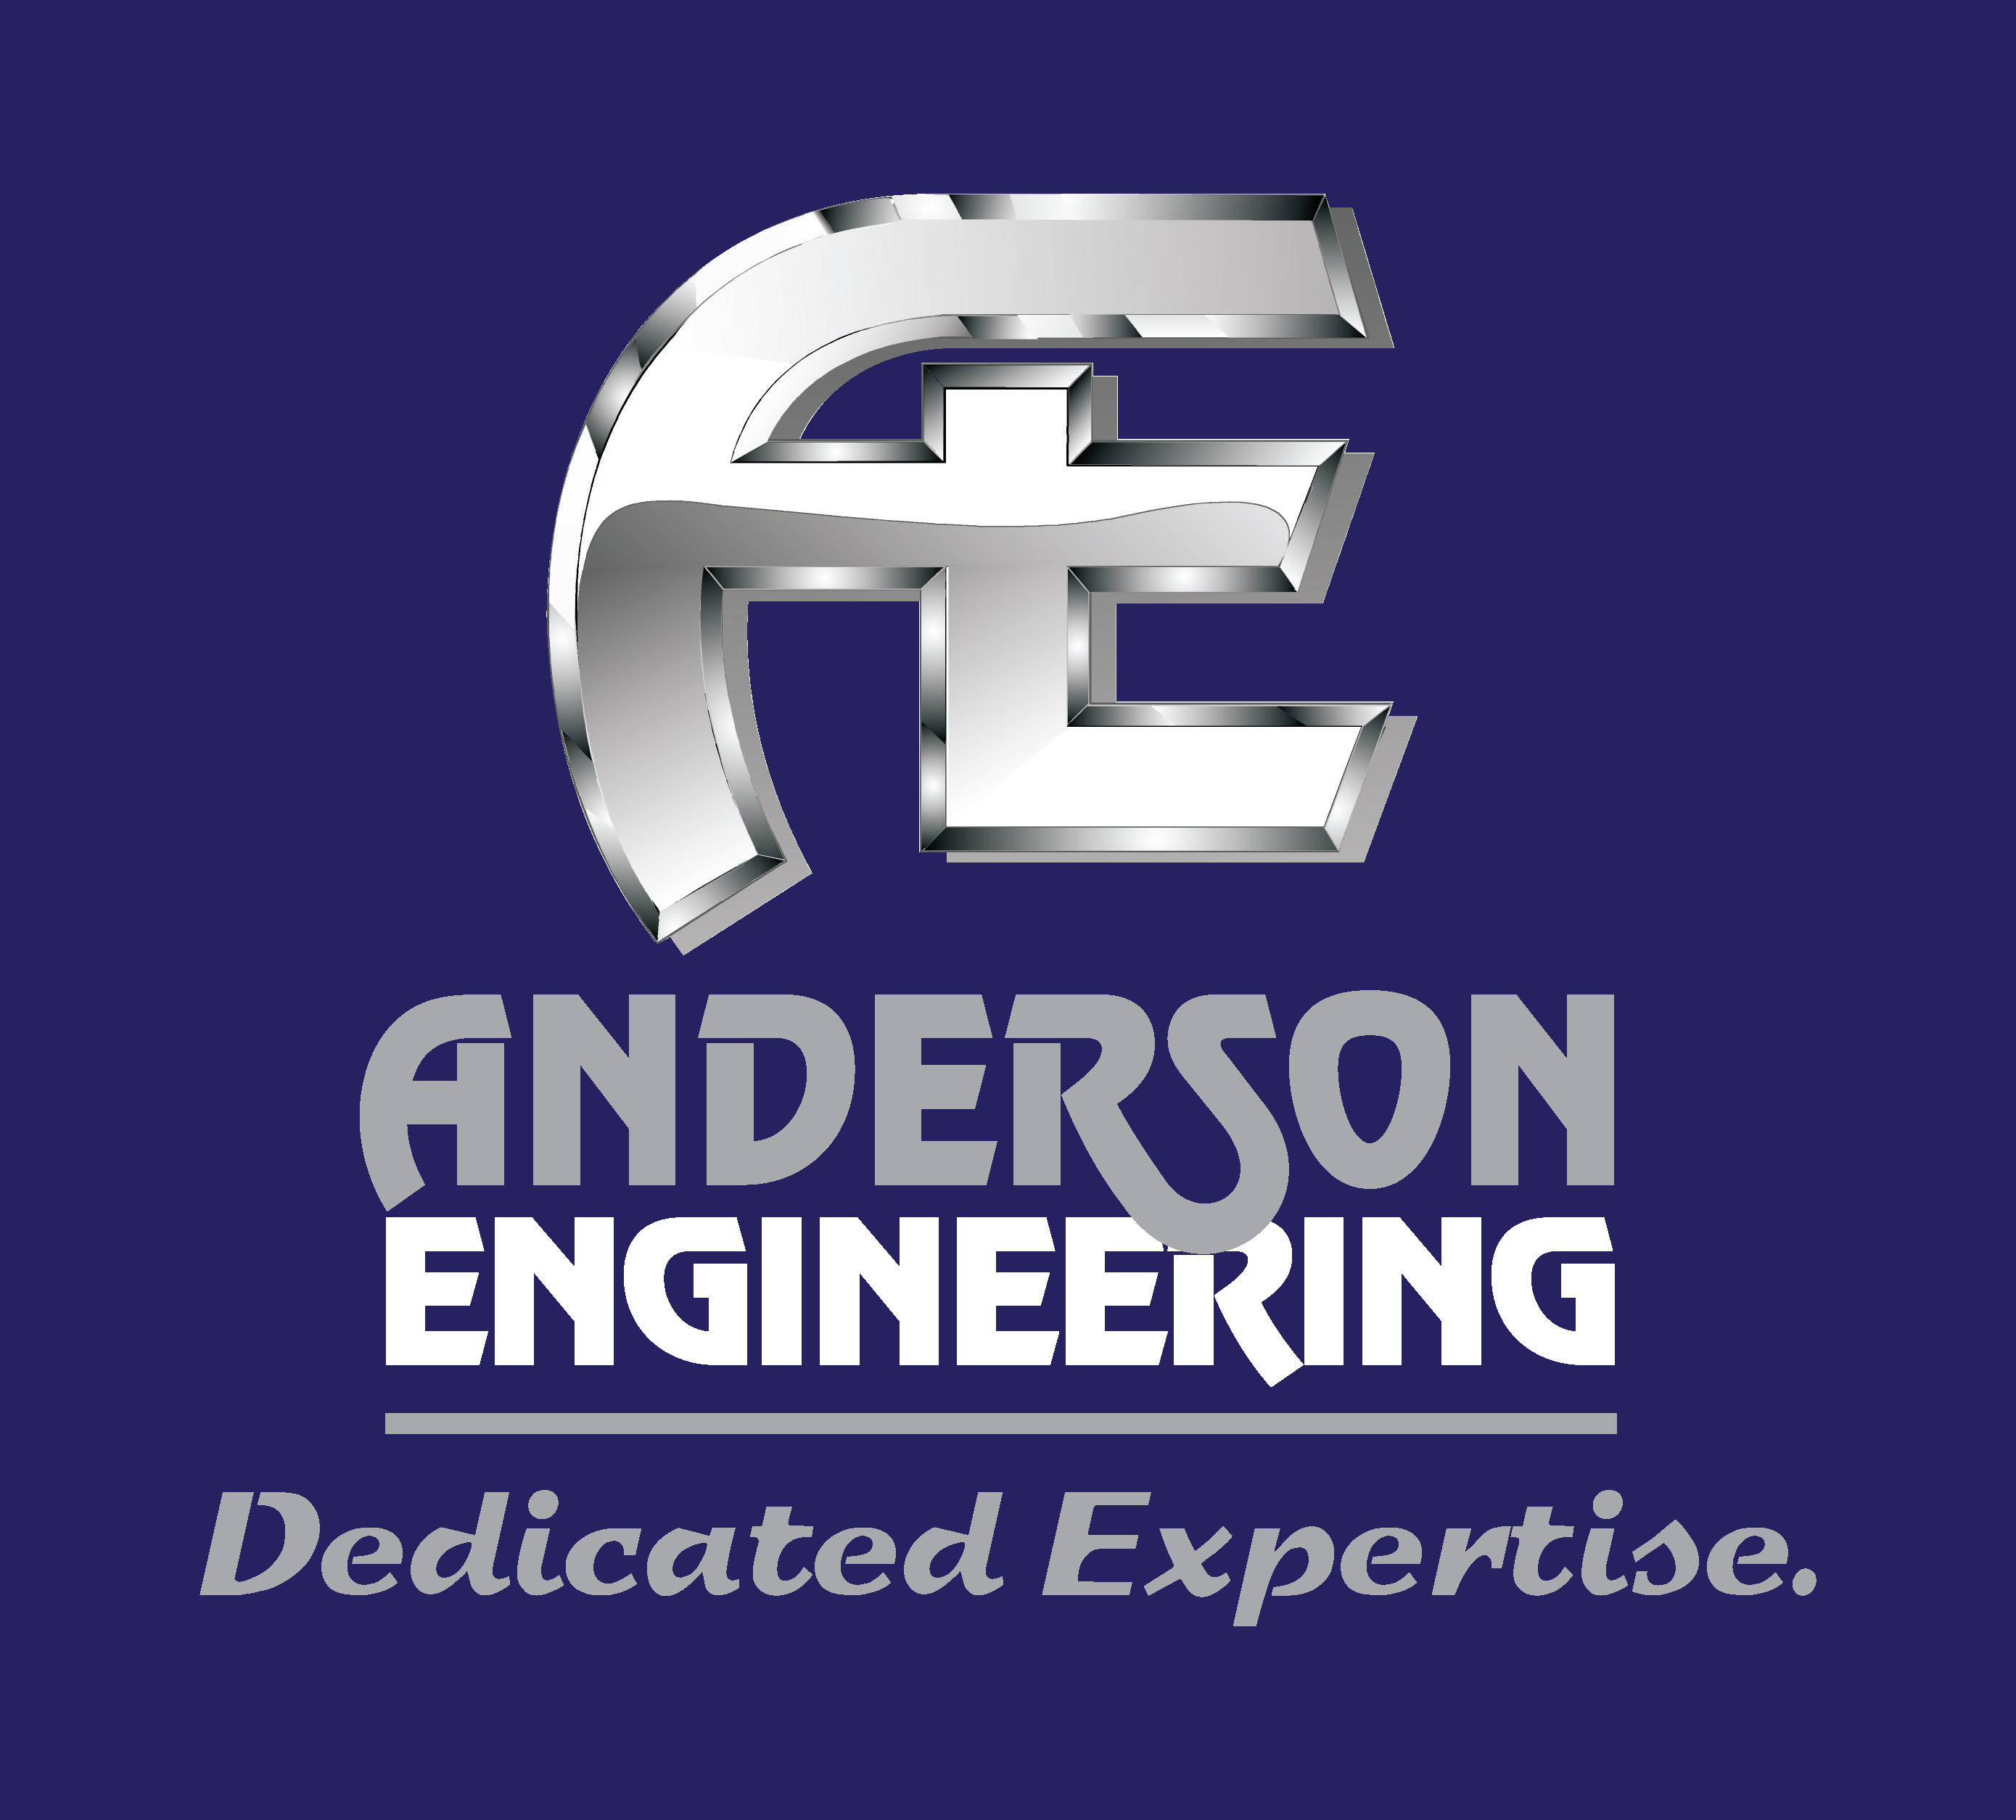 Anderson Engineering Food and Chemical Equipment (Pty) Ltd.